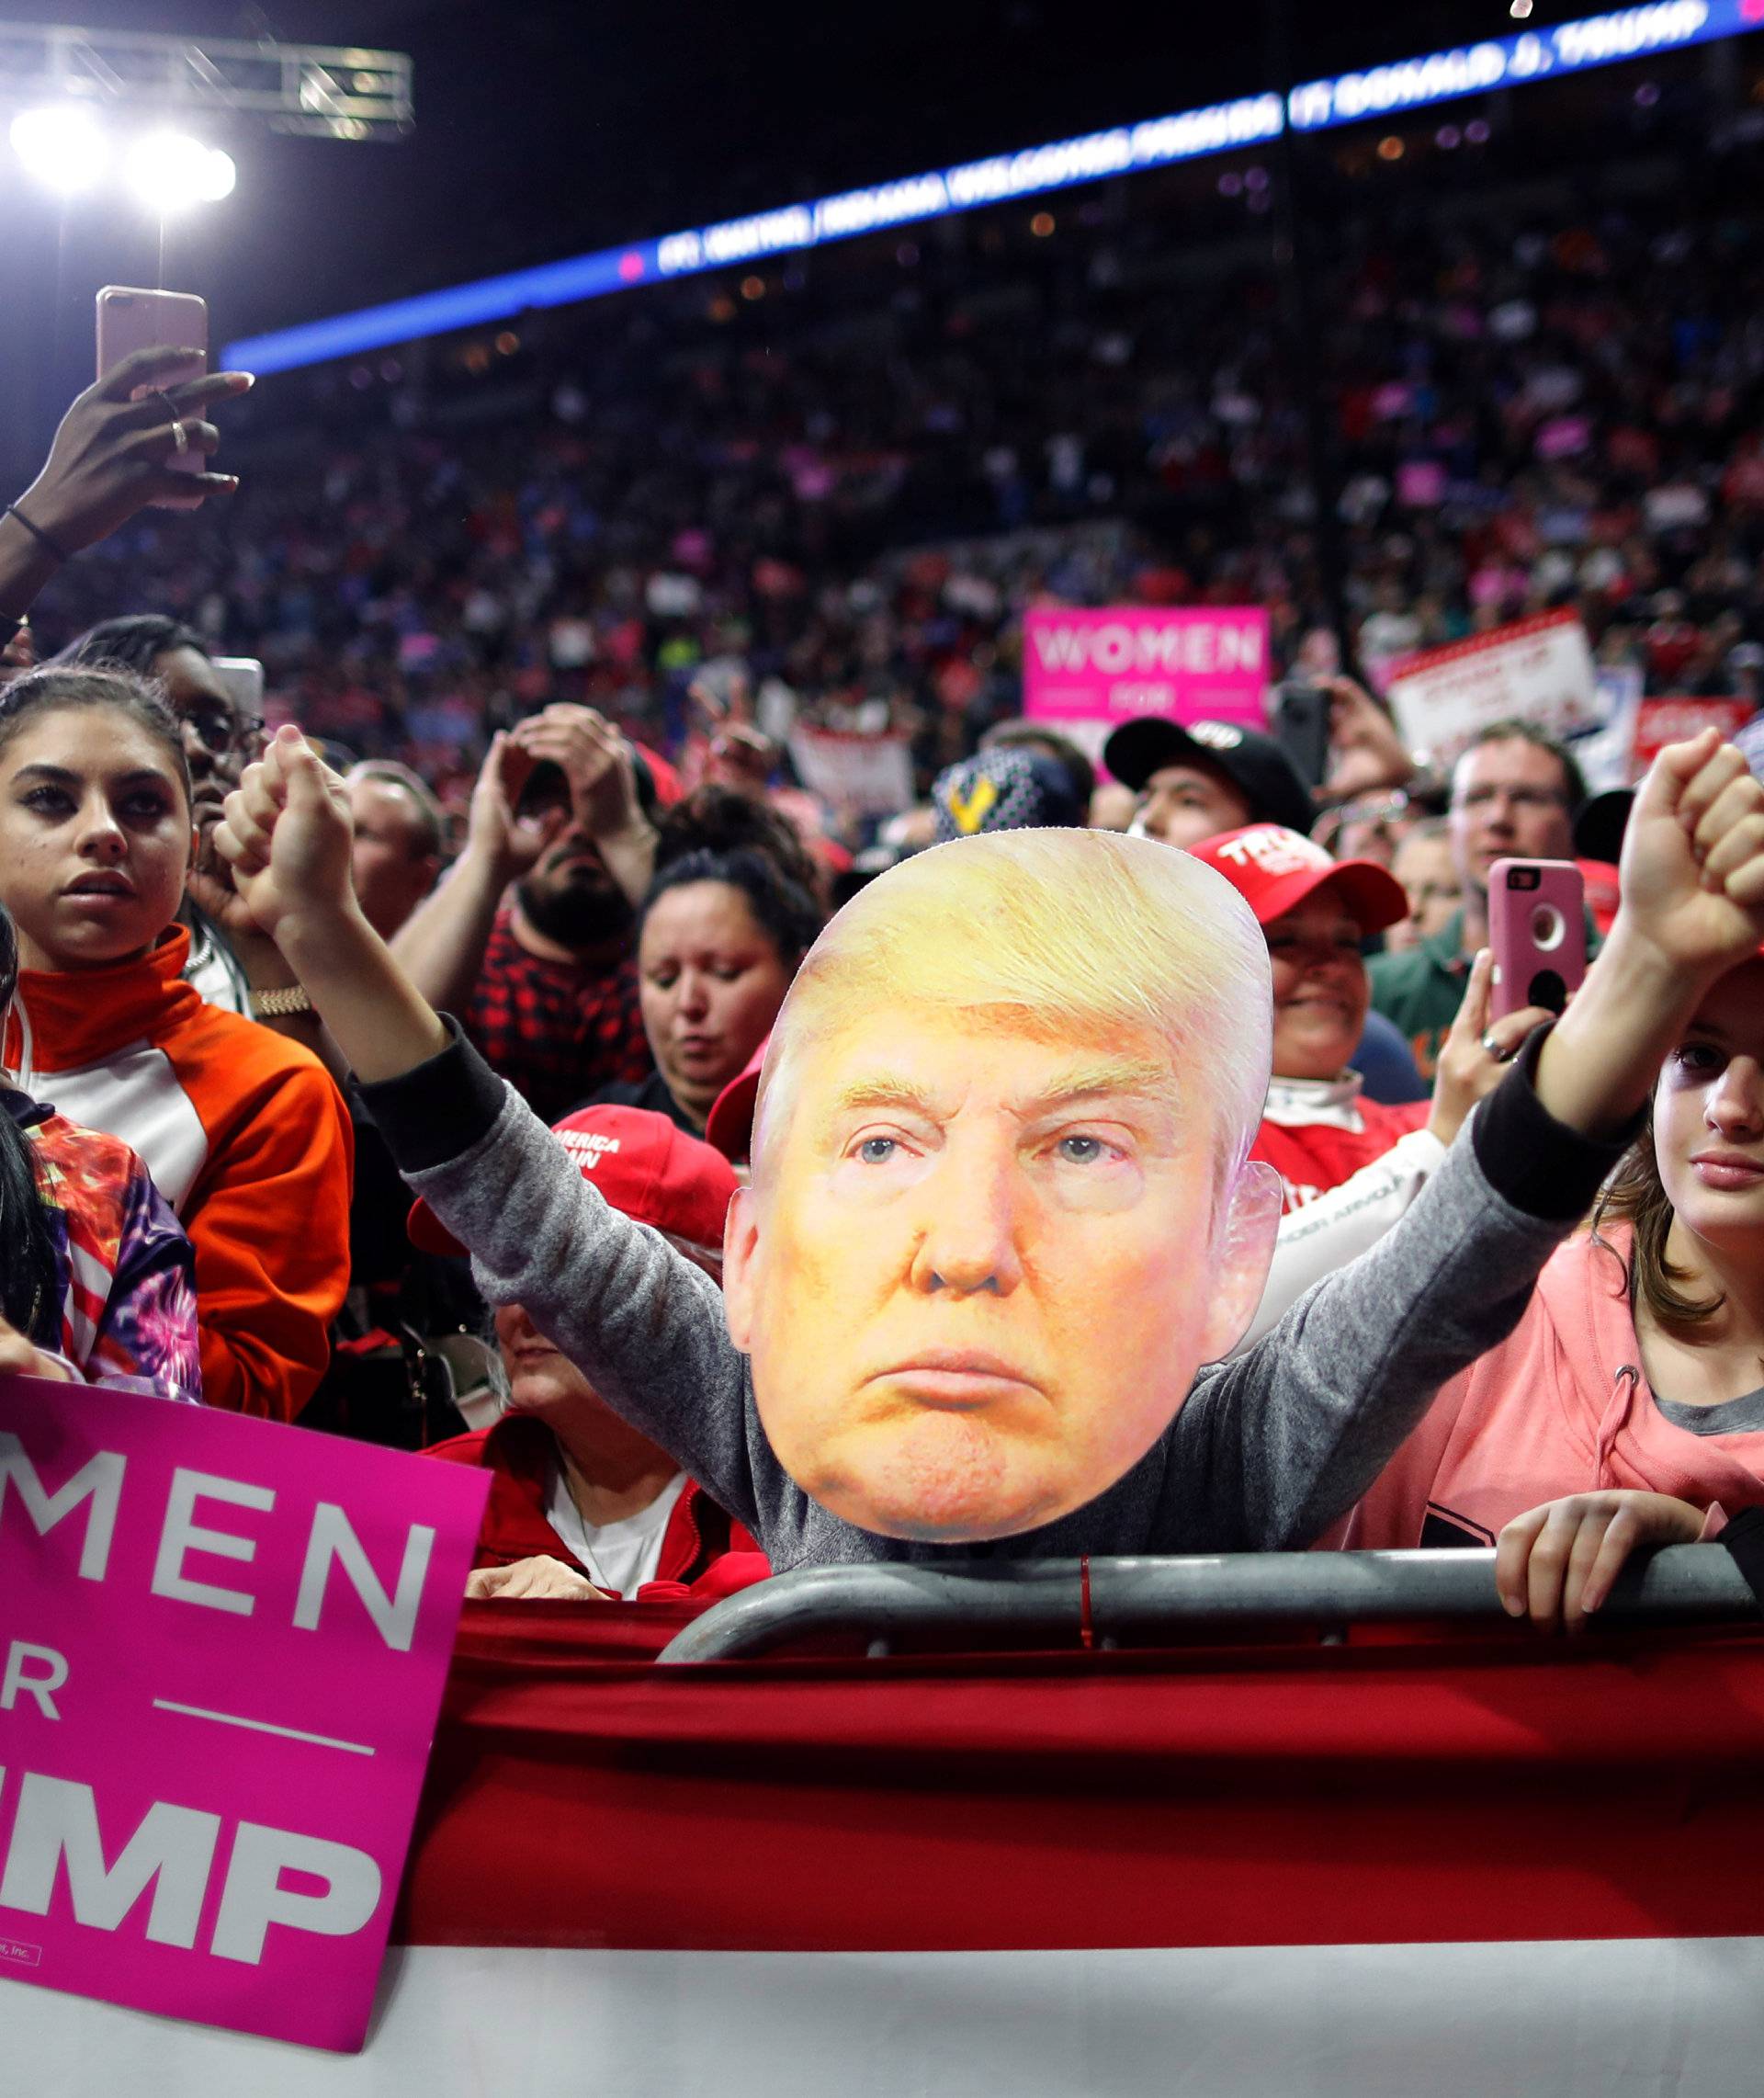 Supporters participate behind an image of U.S. President Donald Trump at a campaign rally at the Allen County War Memorial Coliseum in Fort Wayne